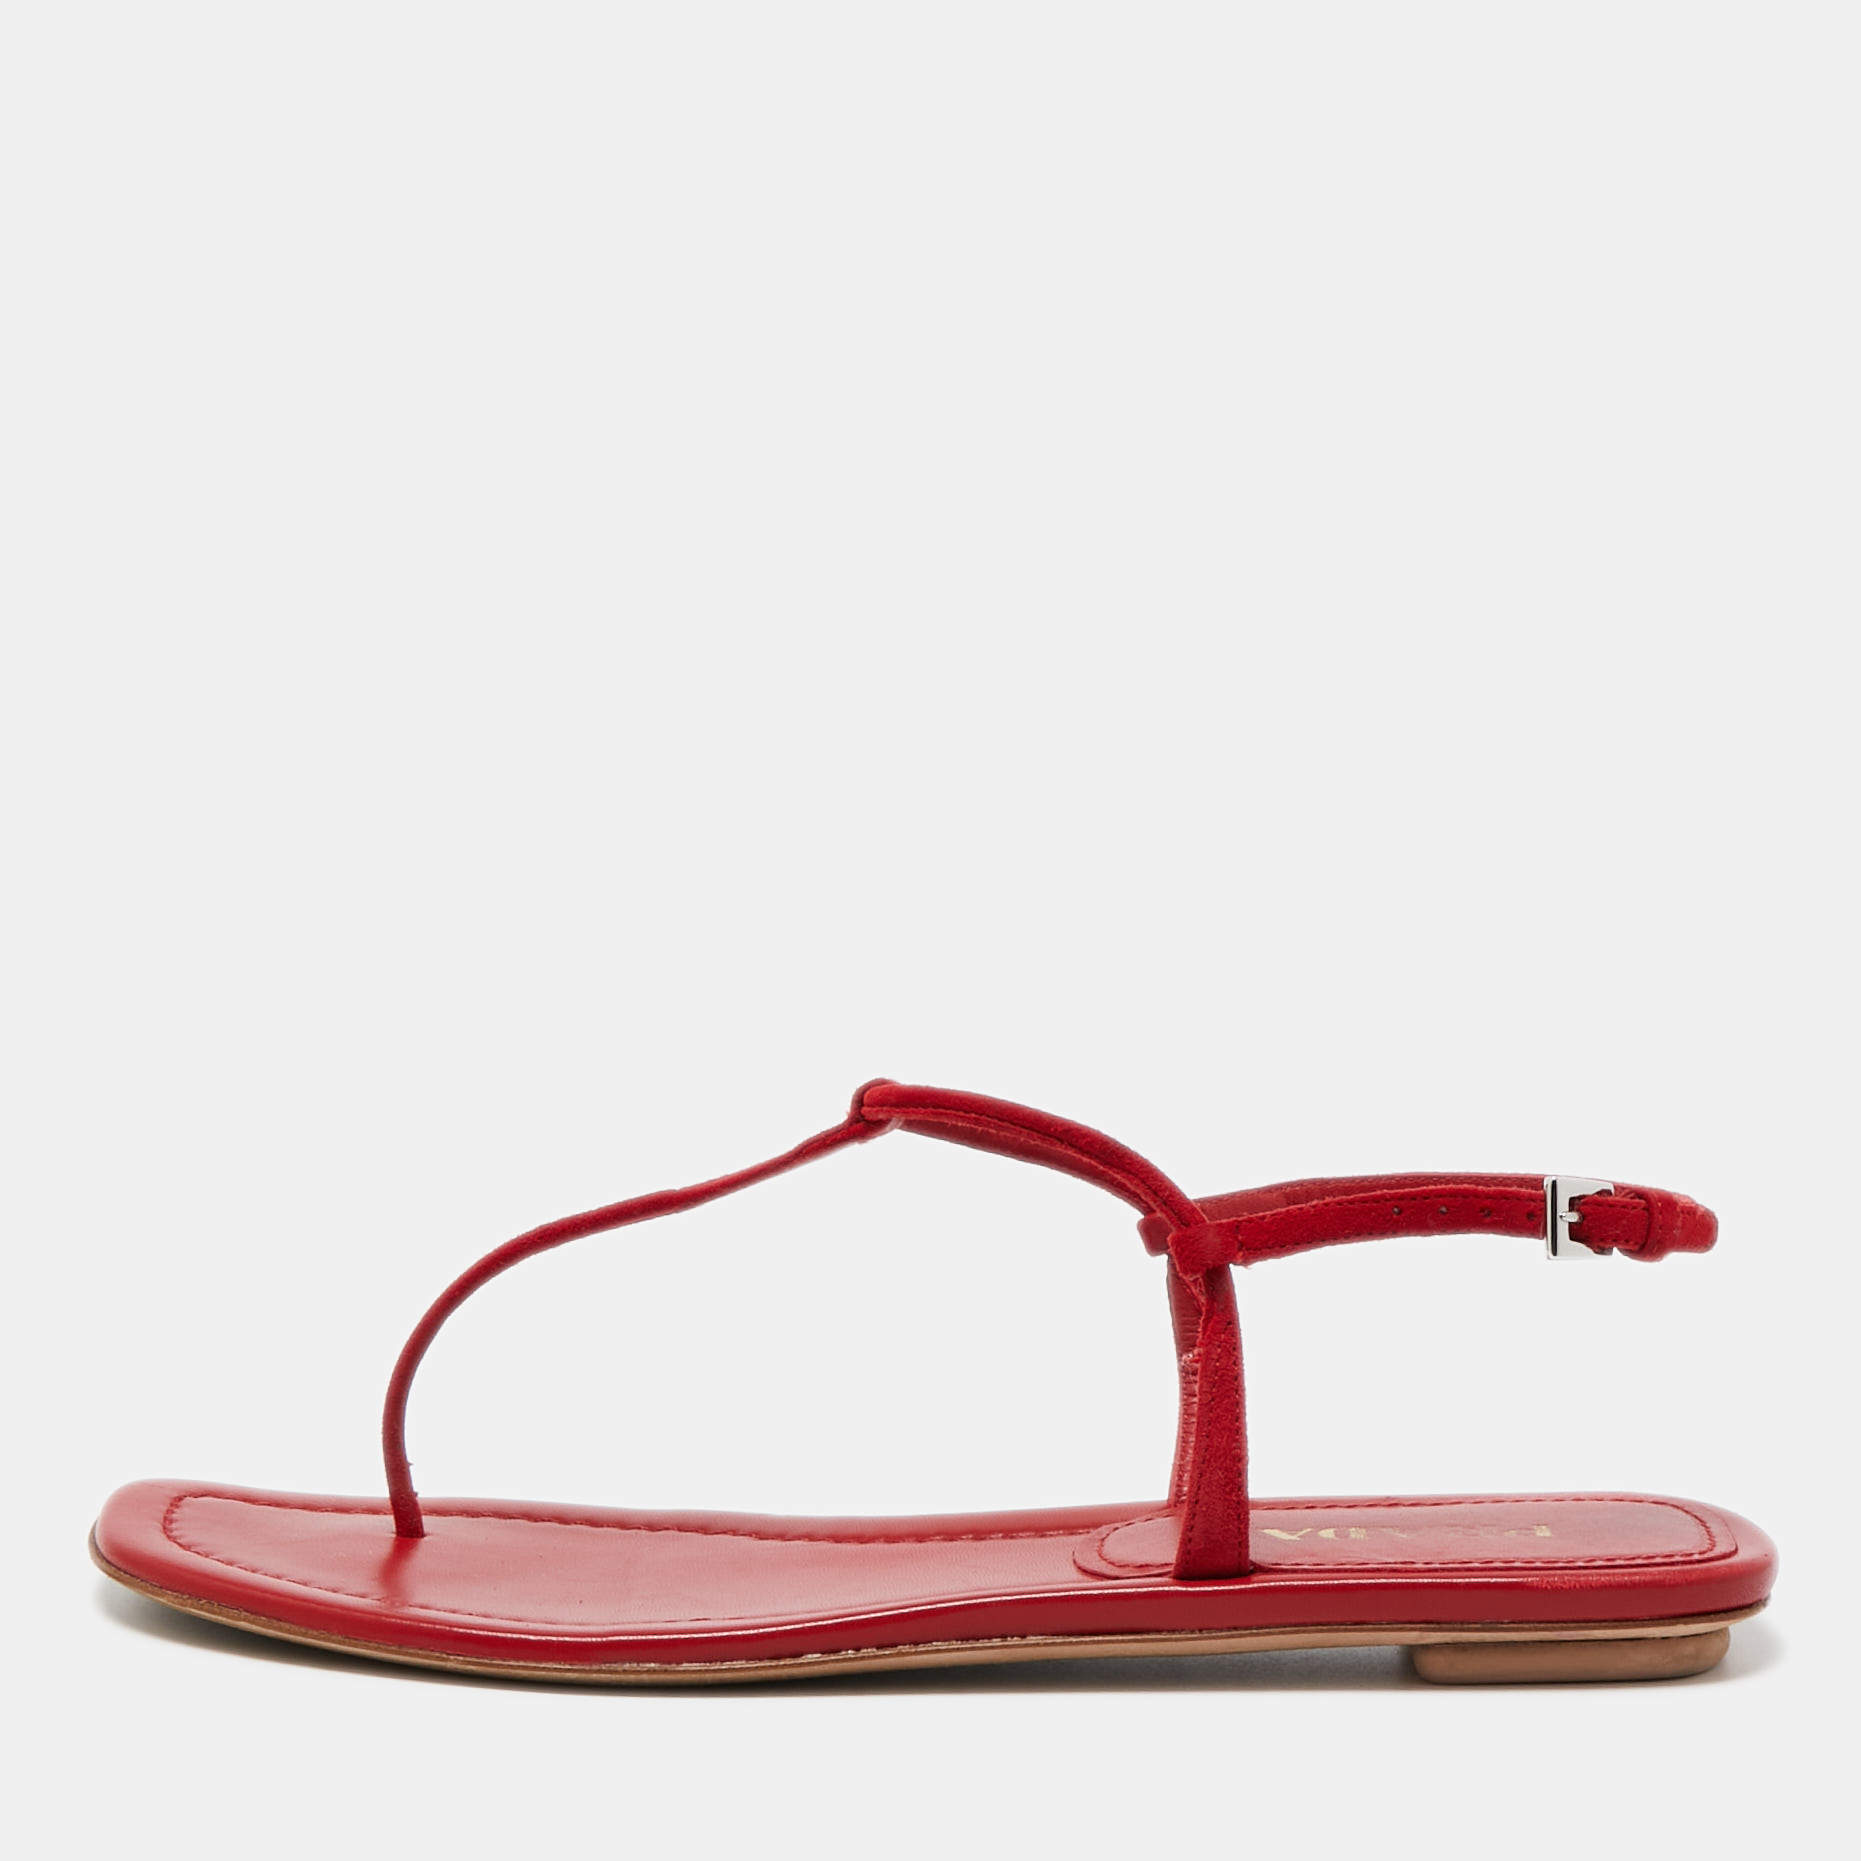 Prada Red Suede Thong Flat Sandals Size 39.5